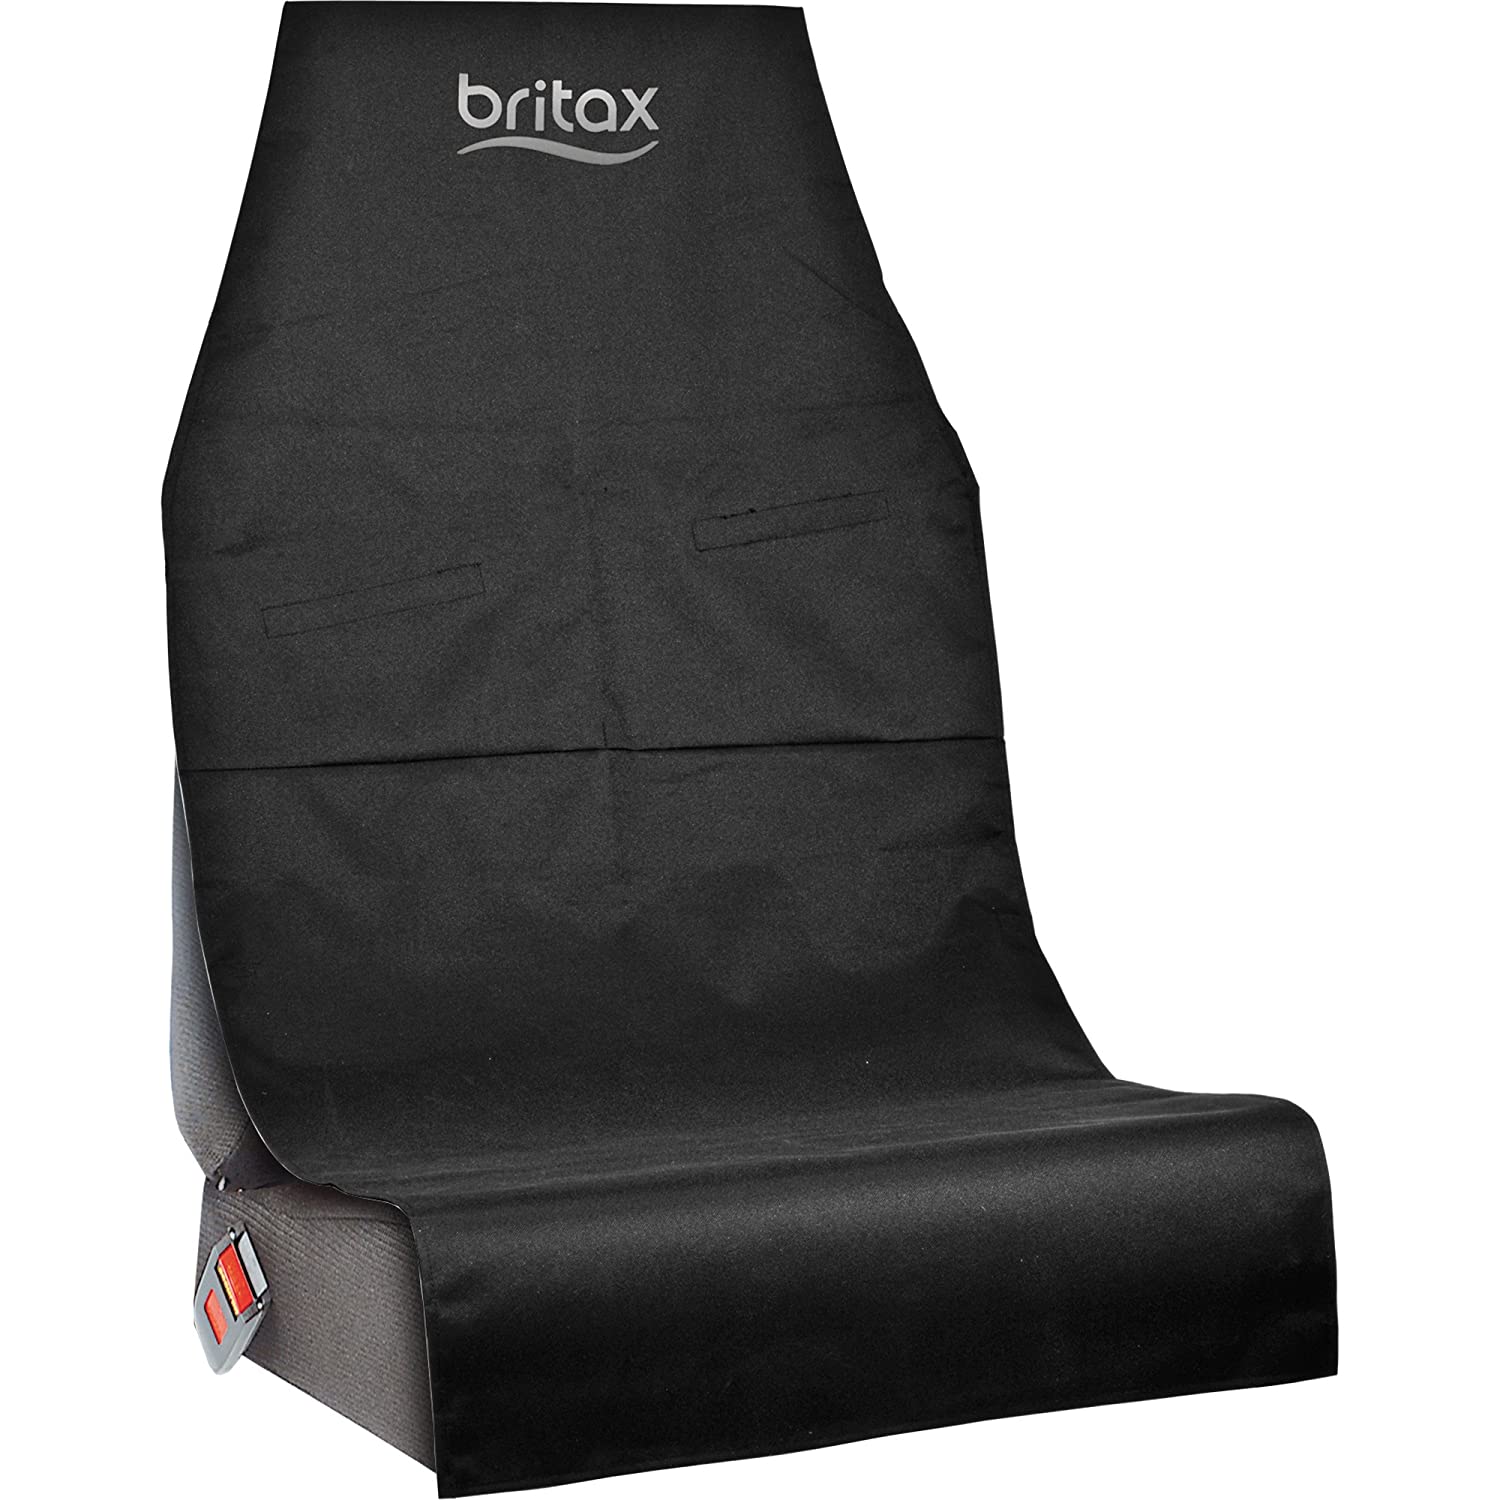 Britax Römer Original Accessories, Protective Pad for Child Seat, Complete Protection for Car Seat, Black